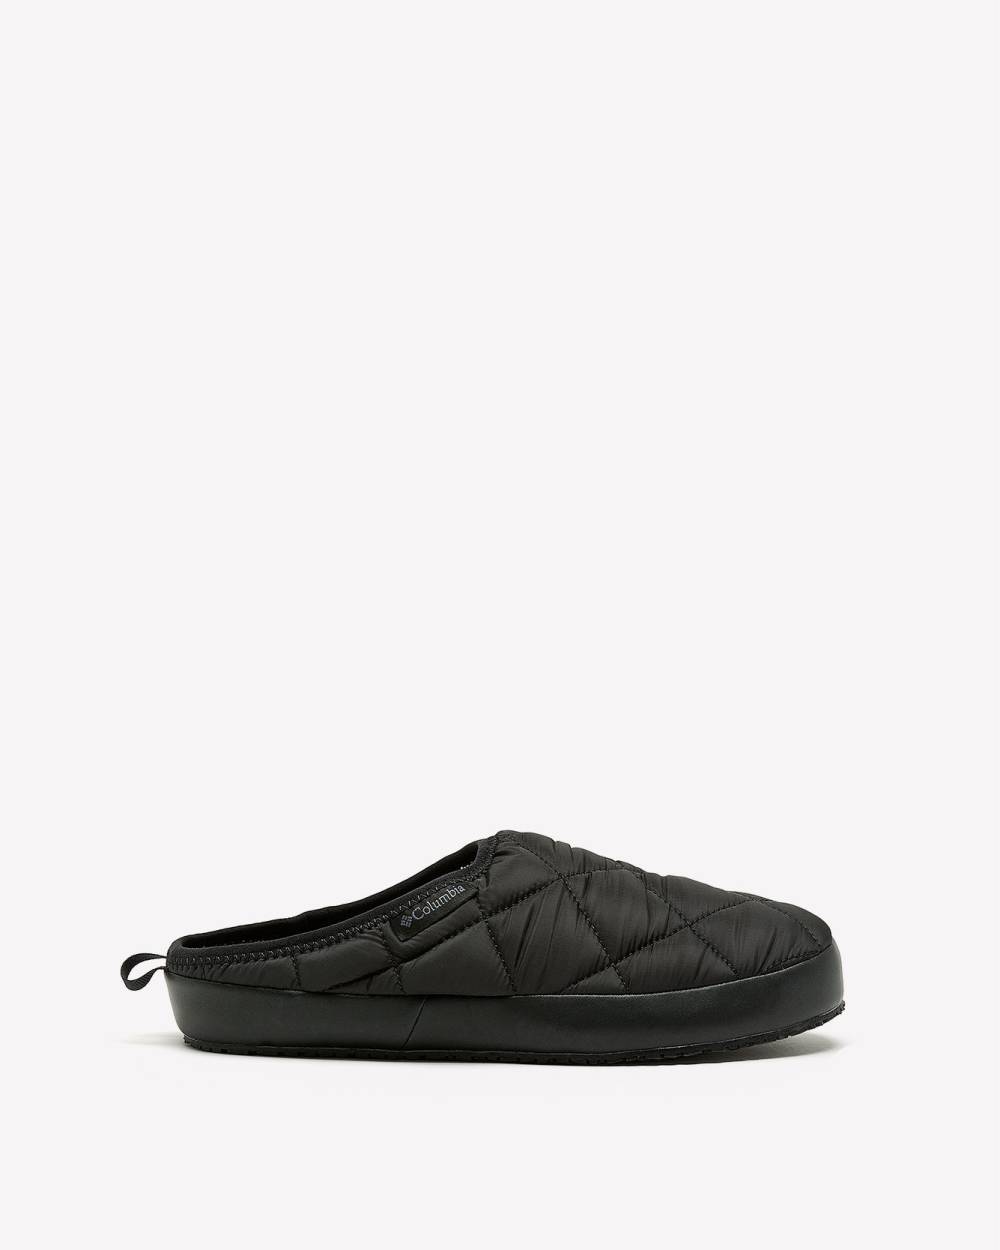 Regular Width, Quilted Lazy Bend Camper Slippers - Columbia | Penningtons